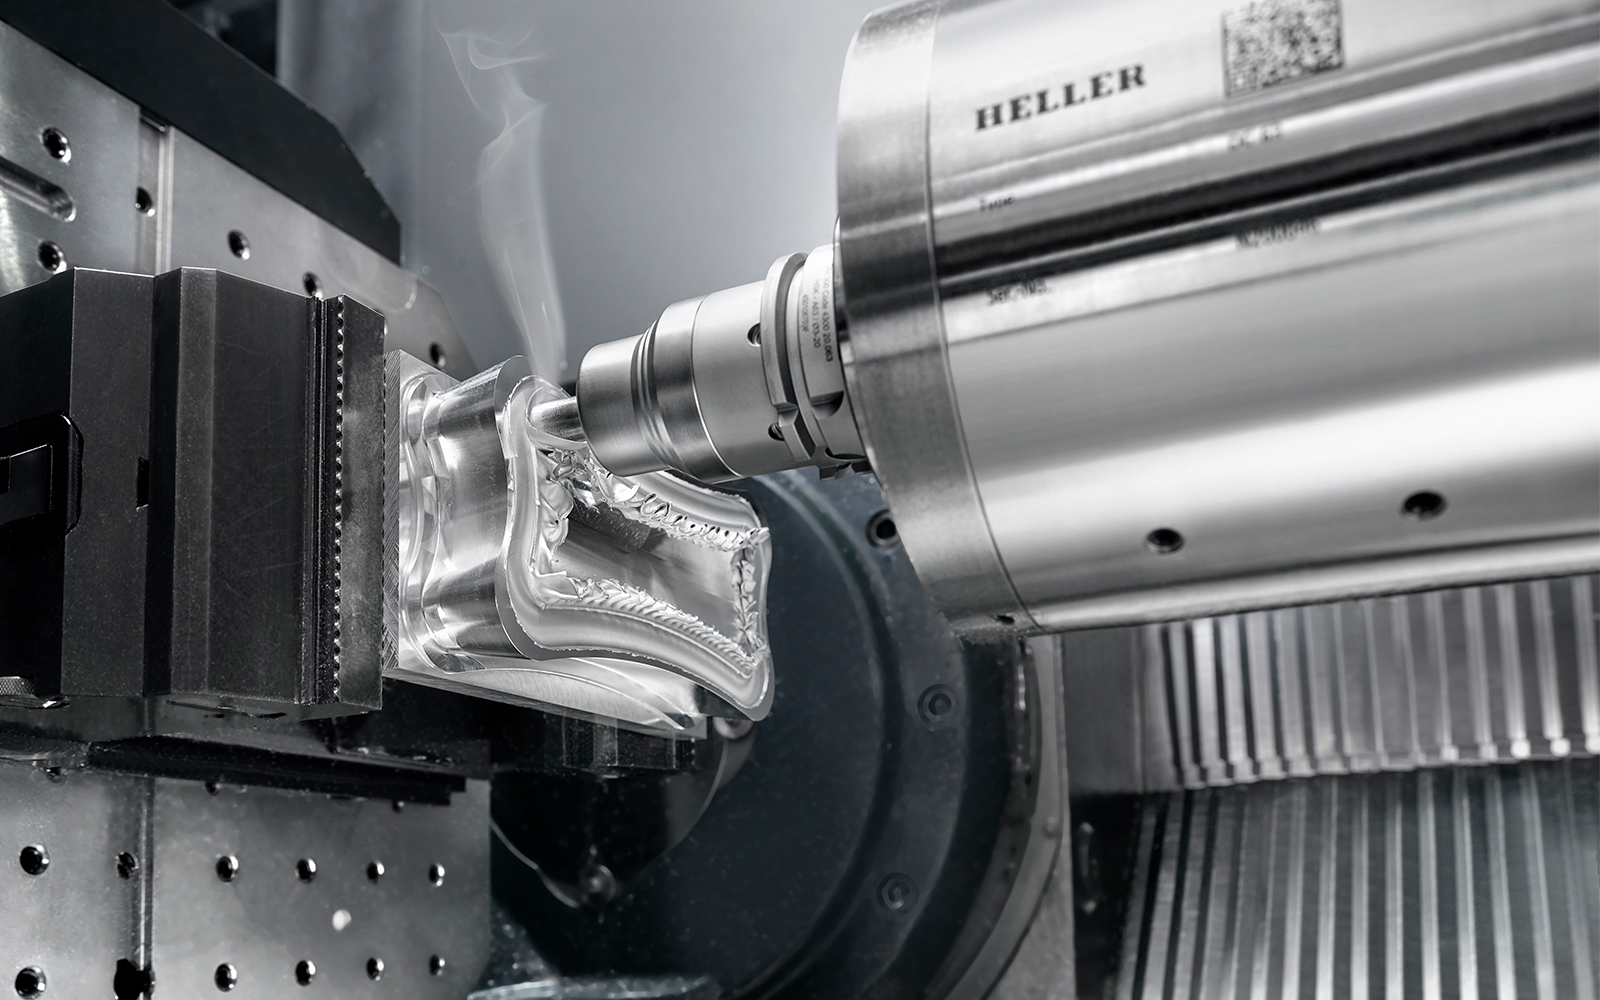 Machining centres as ‘green’ welding cells: HELLER enables friction stir welding on all machine series